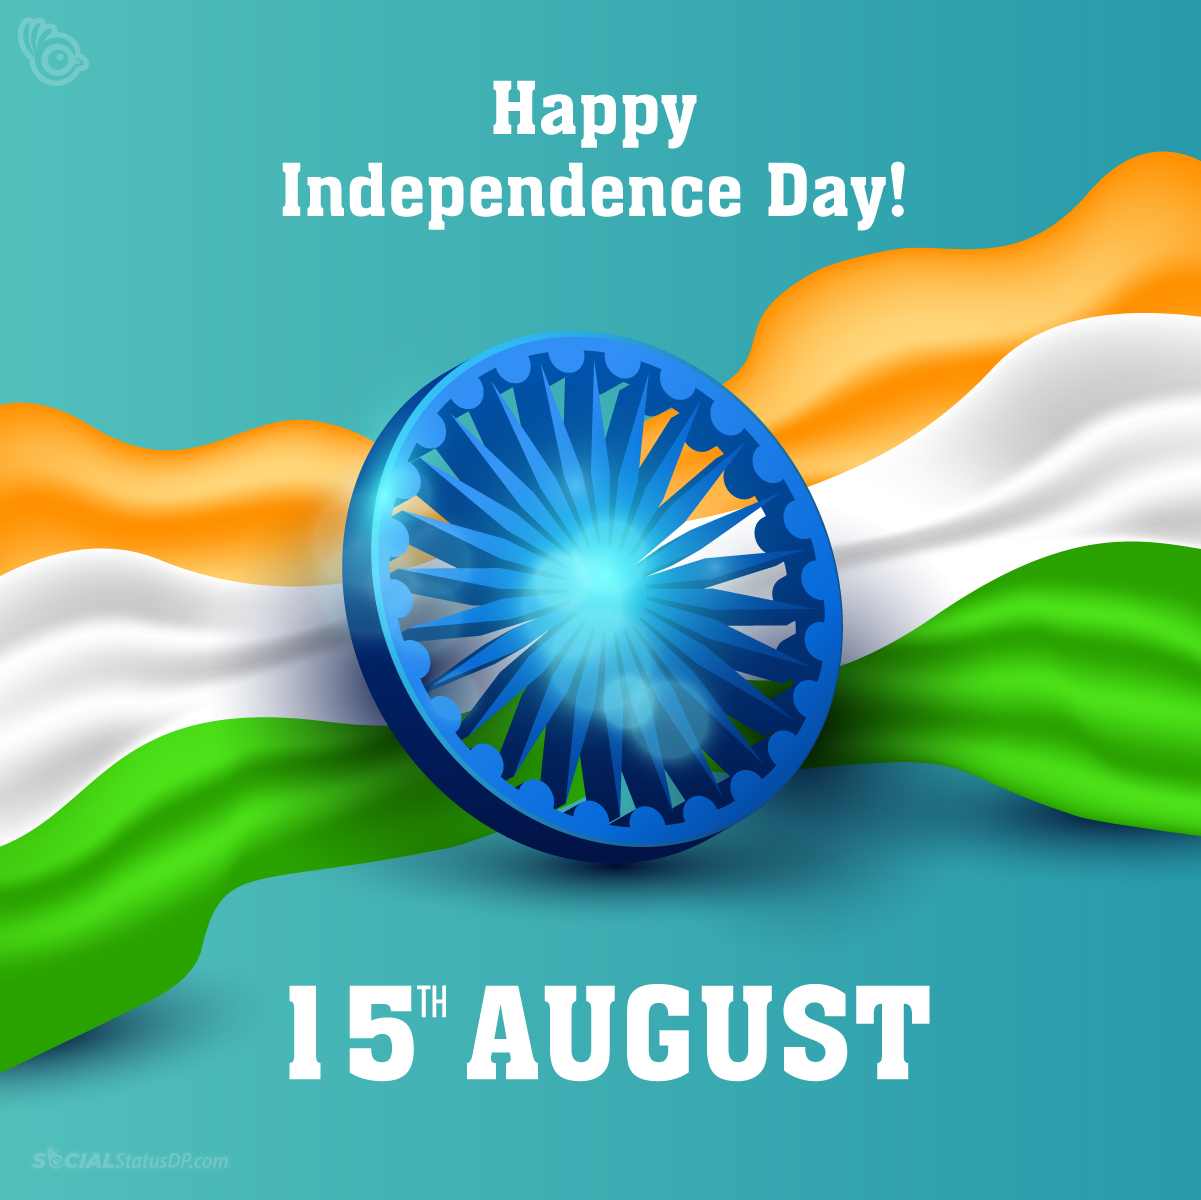 Happy 75th Independence Day 2022 Wishes, Patriotic Quotes, Messages, with Image, Photo, Picture, Status DP